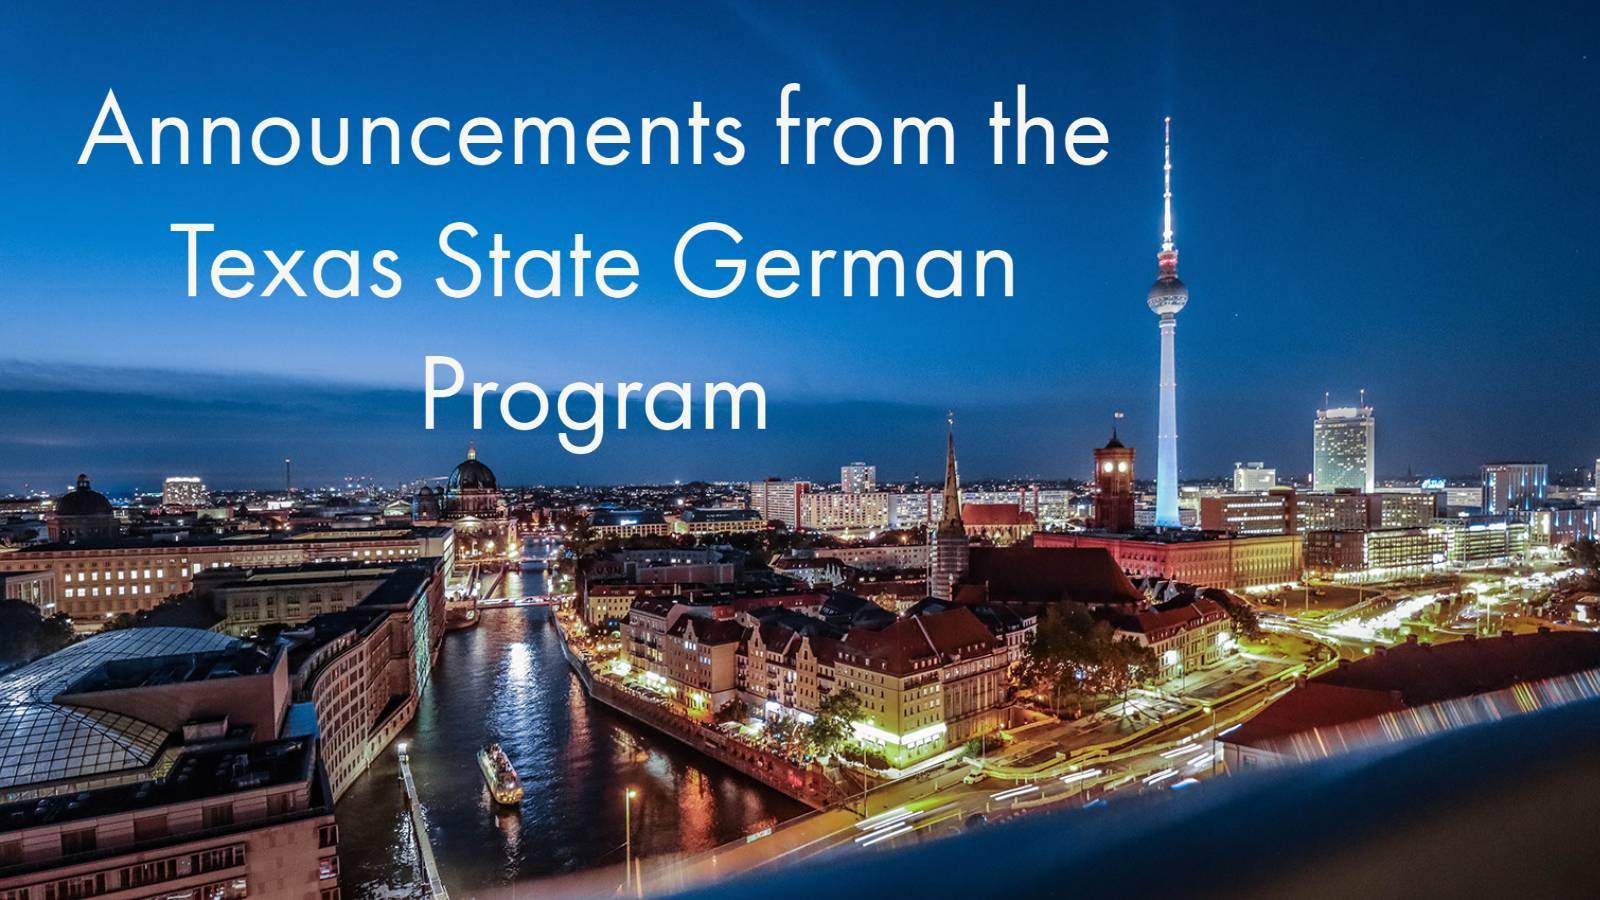 Skyline of Berlin at dusk. Text: Announcements from the Texas State German Program